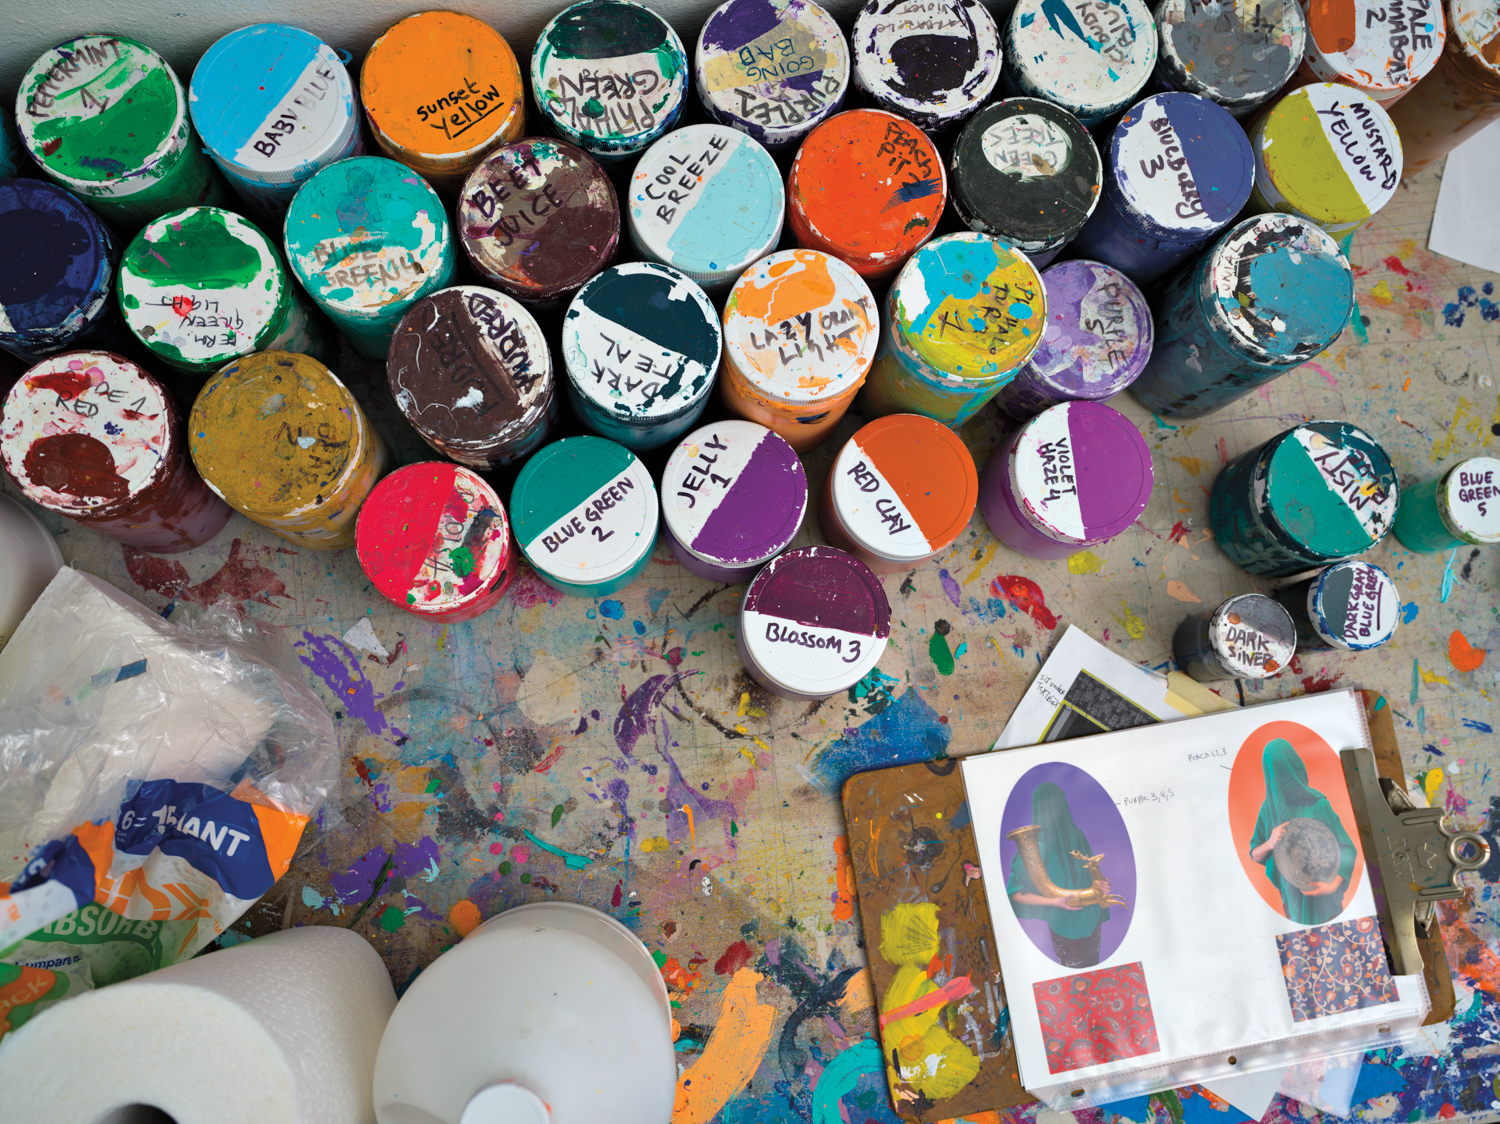 collection of acrylic paints in a variety of colors with handwritten labels against a paint splattered surface